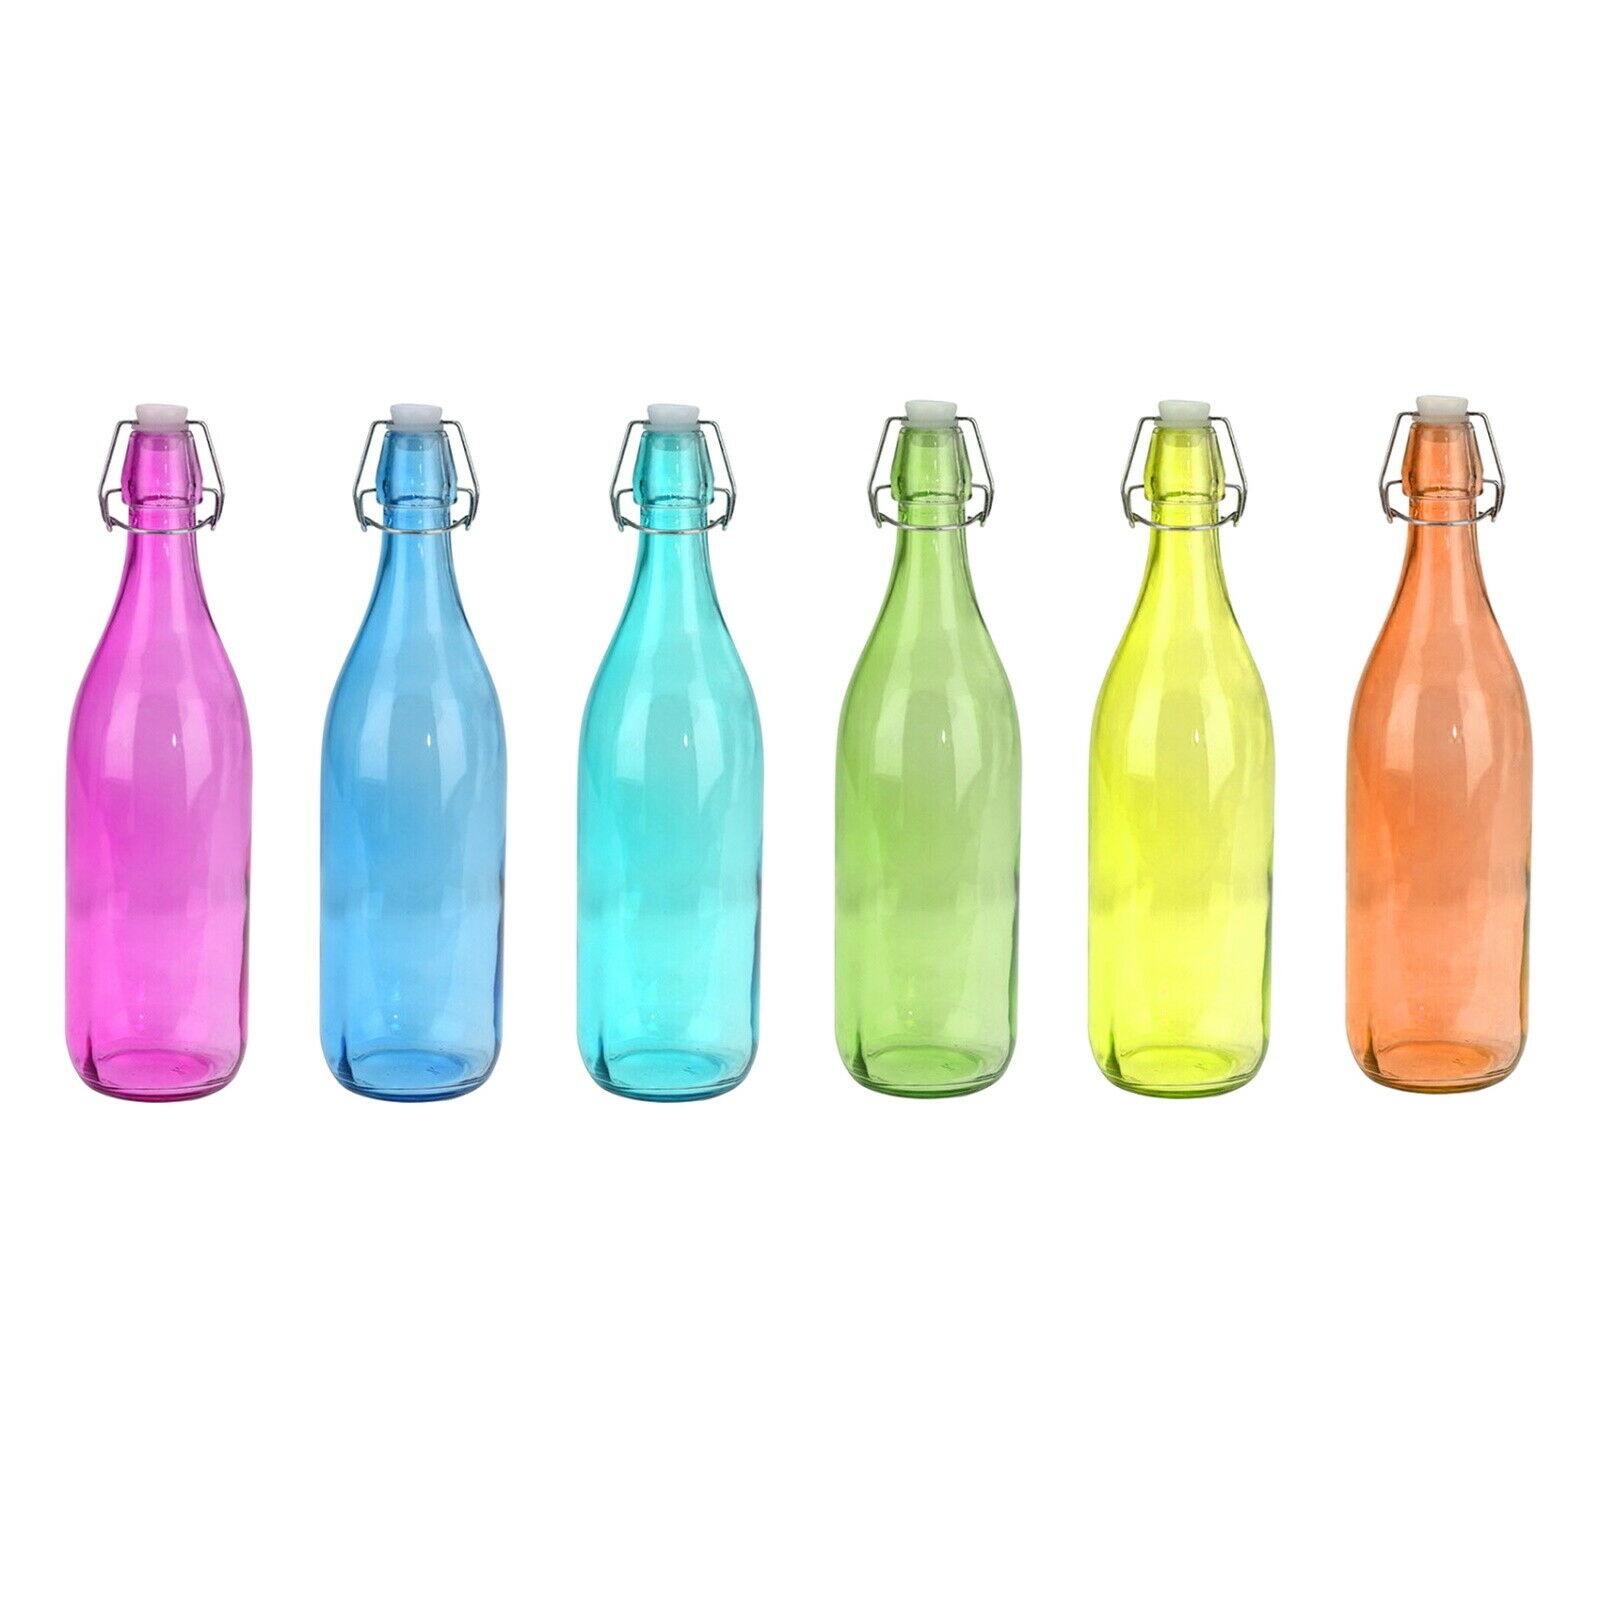 Details about   Glass Bottles Glass Bottles With Swing Top 